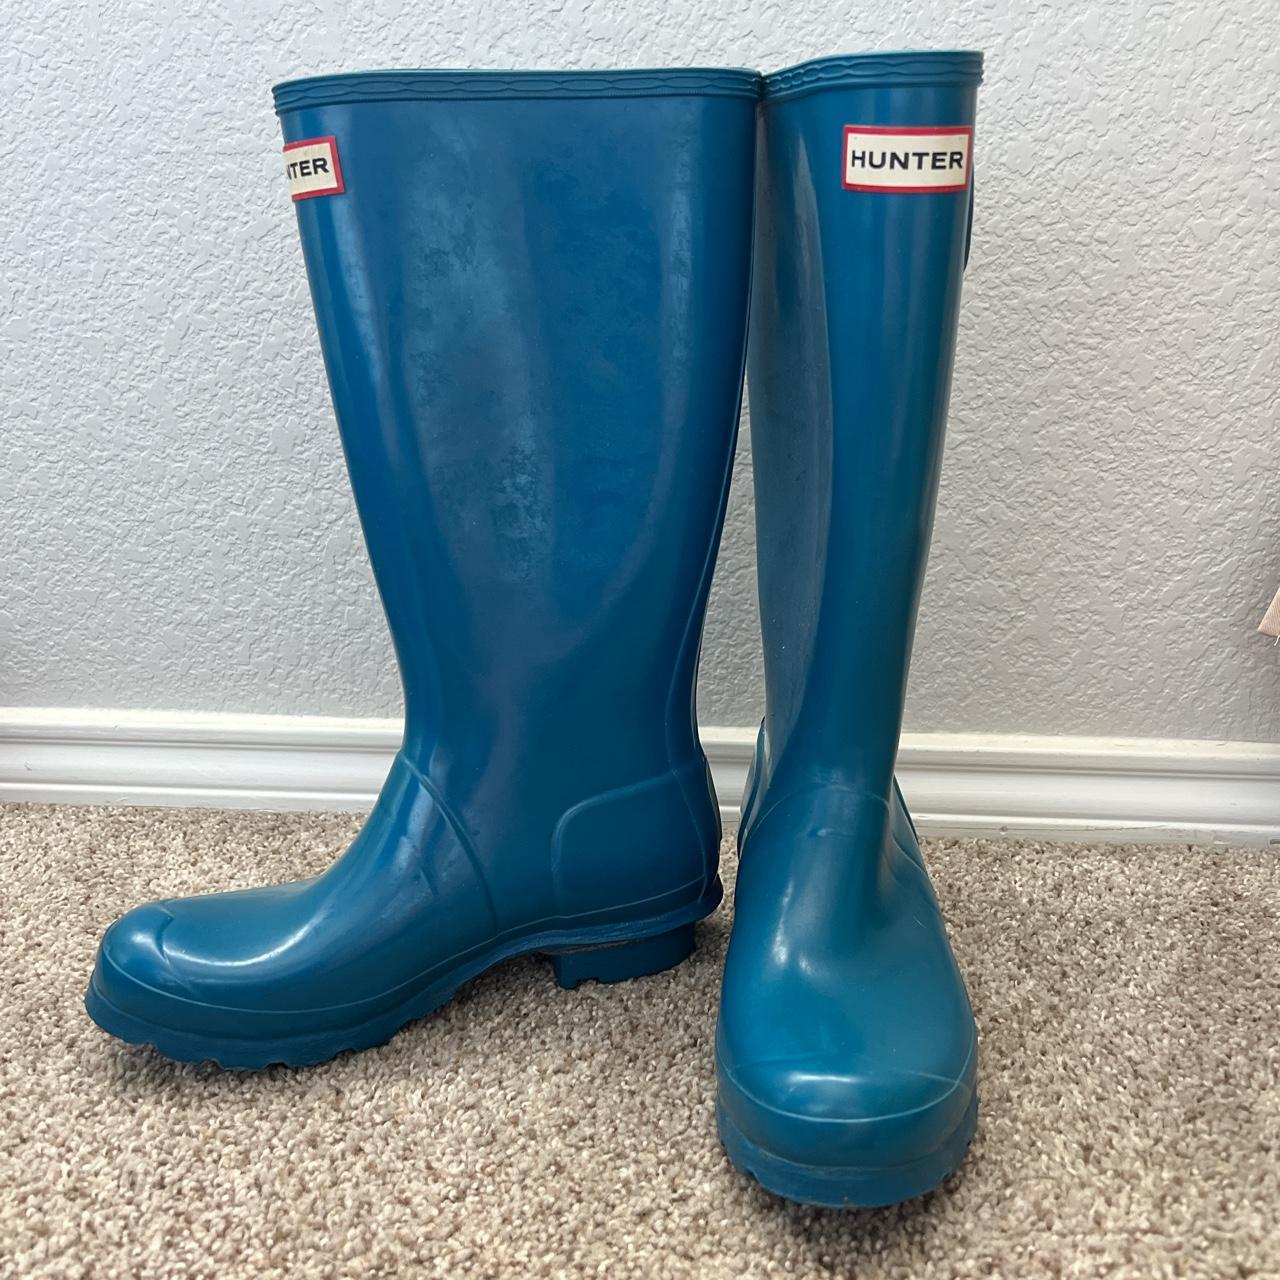 Teal Hunter rain boots, barely worn. For like a 7 or... - Depop